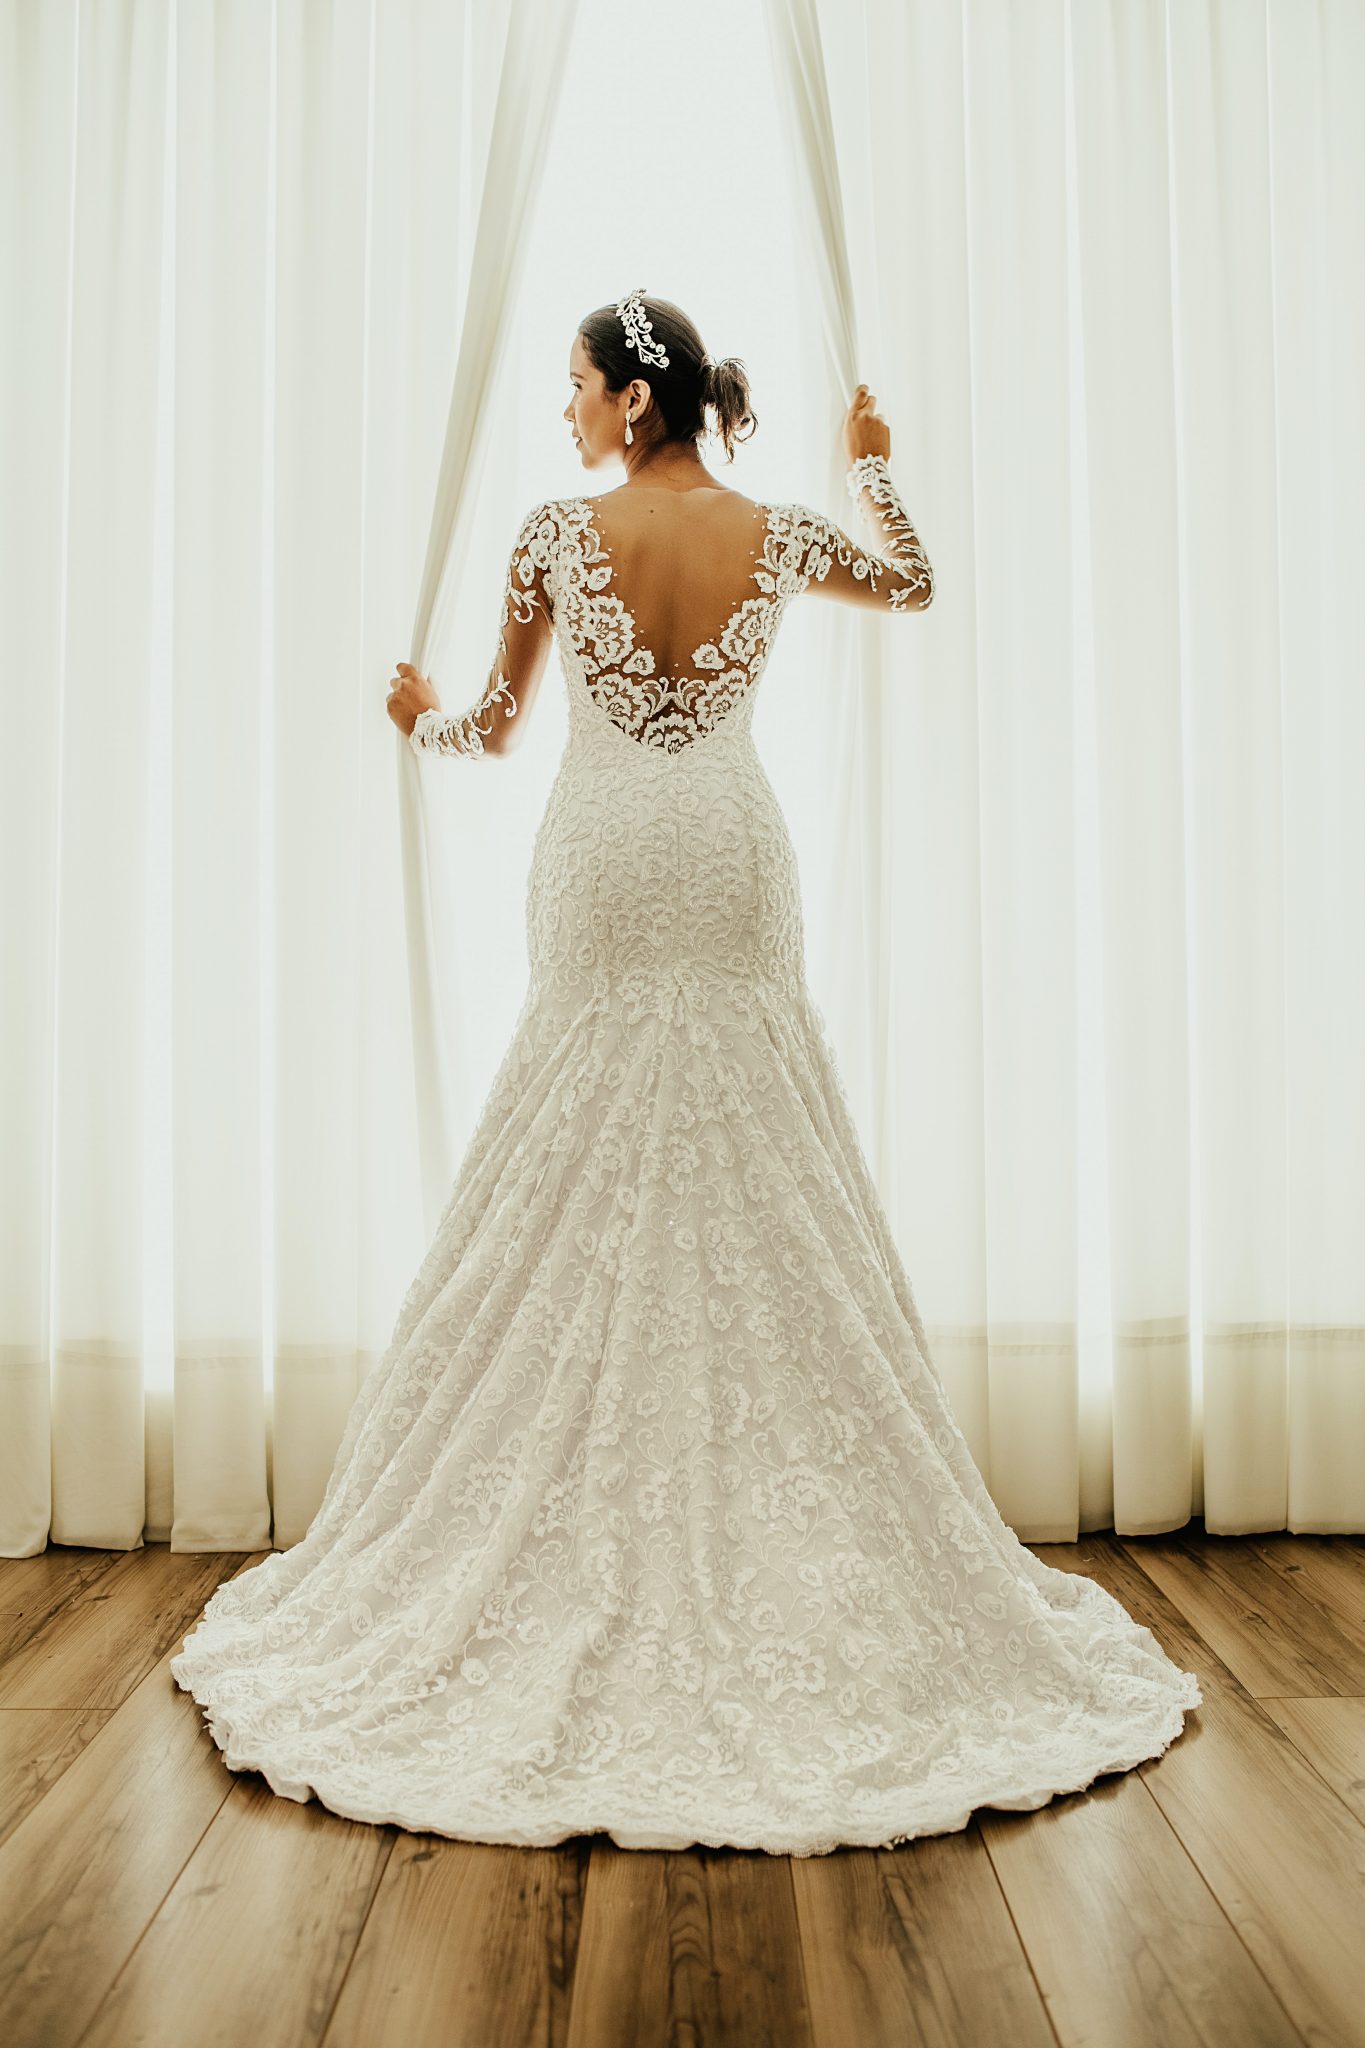 What wedding dress is best for a pearshaped body?